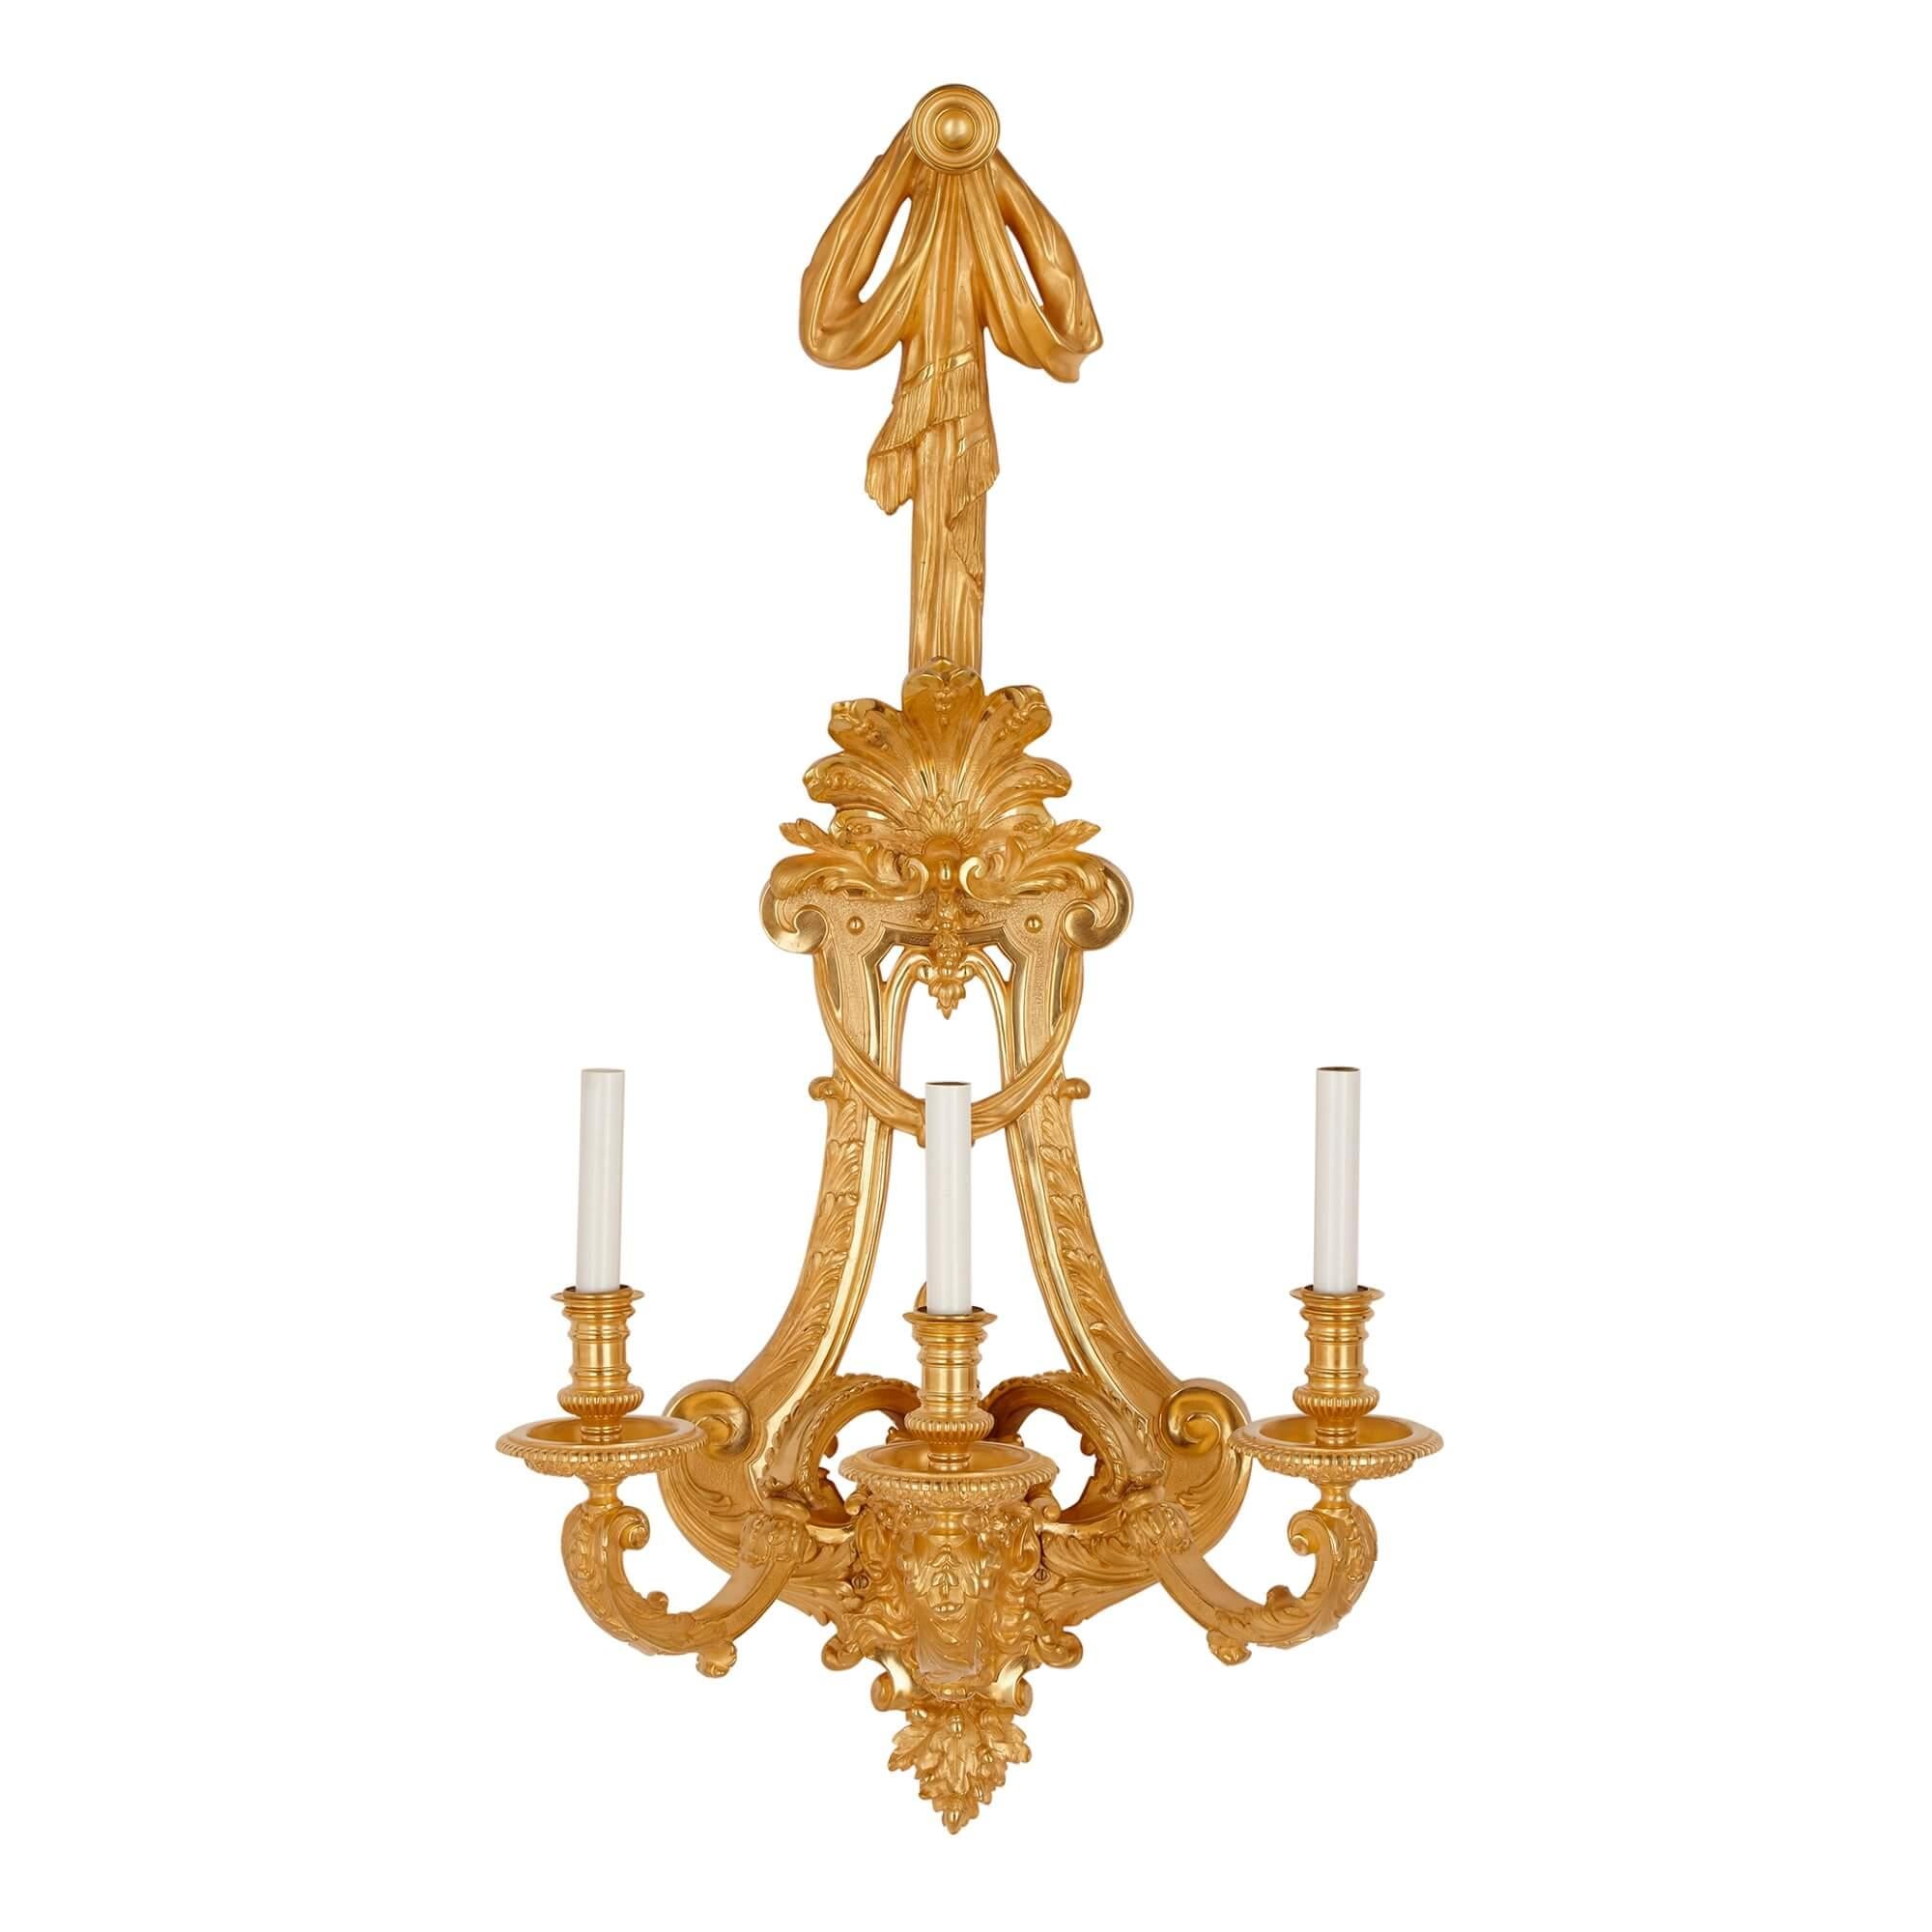 Two large French ormolu three-branch wall sconces by H. Vian
French, late 19th Century
Height 95cm, width 48cm, depth 30cm

These large three branch lights, measuring a colossal 95cm in height, were made by the important late 19th Century bronzier